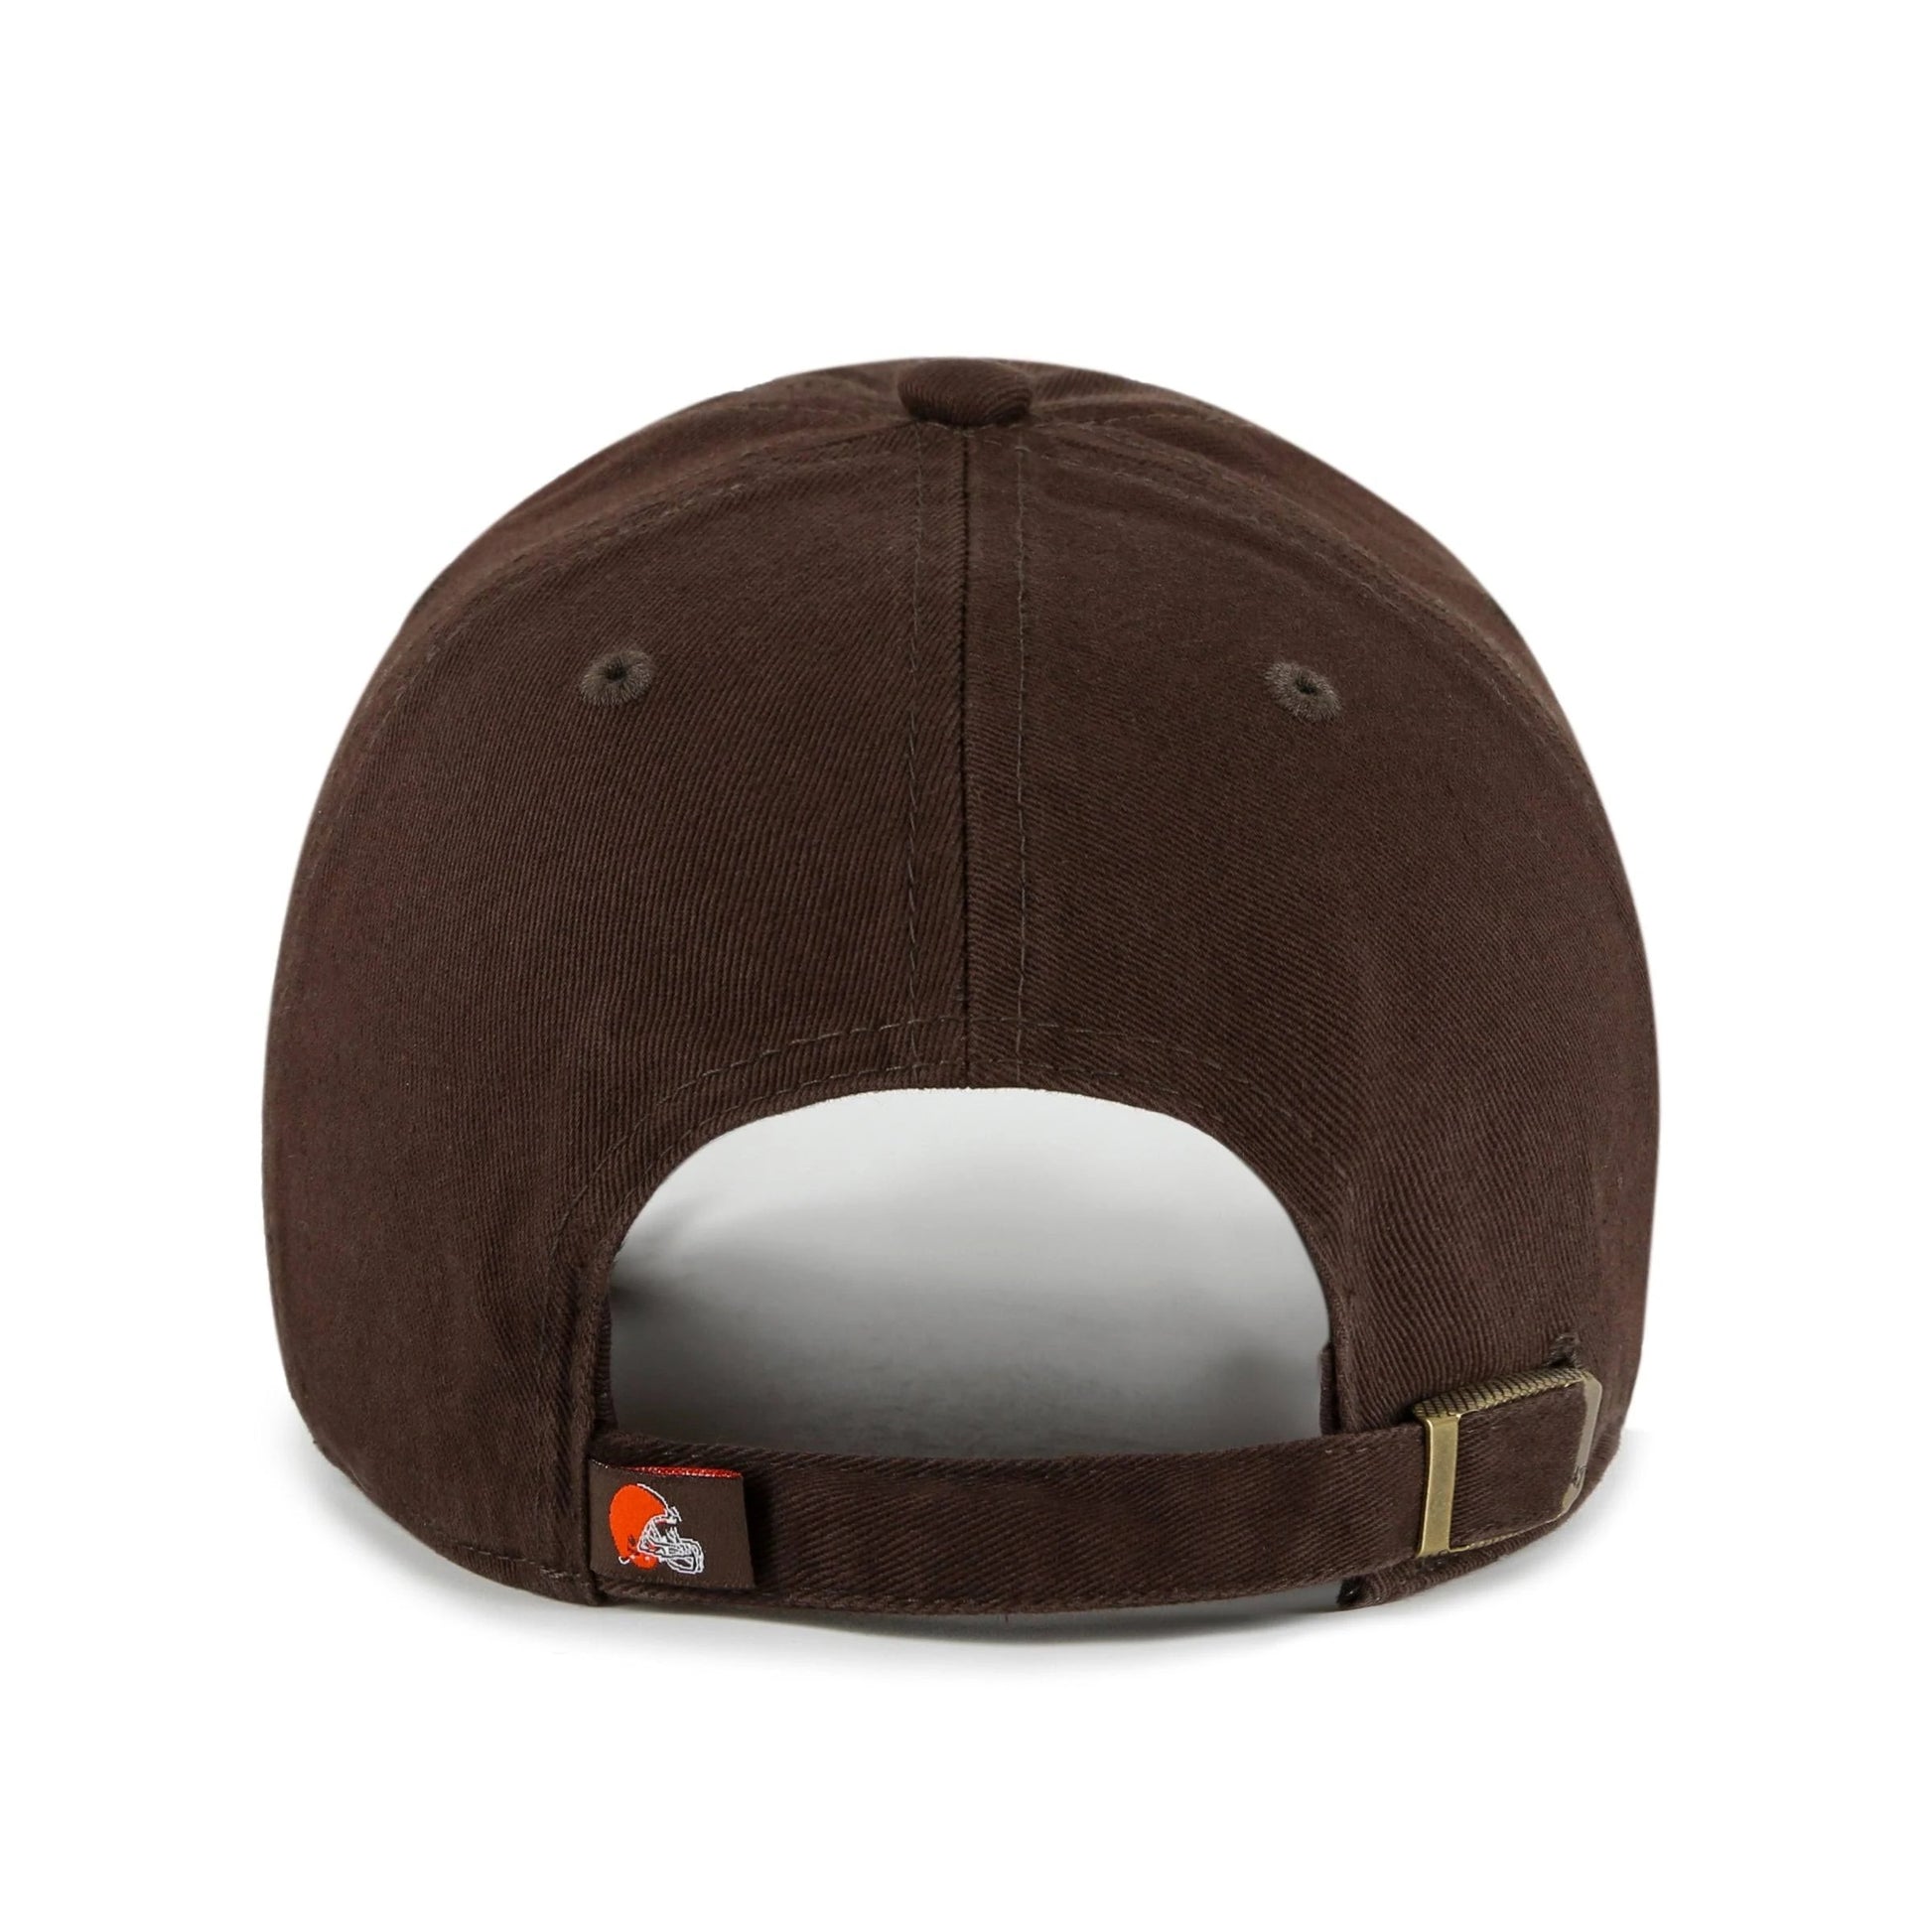 47 Brand Cleveland Browns Clean Up Hat - Leaside Hockey Shop Inc.